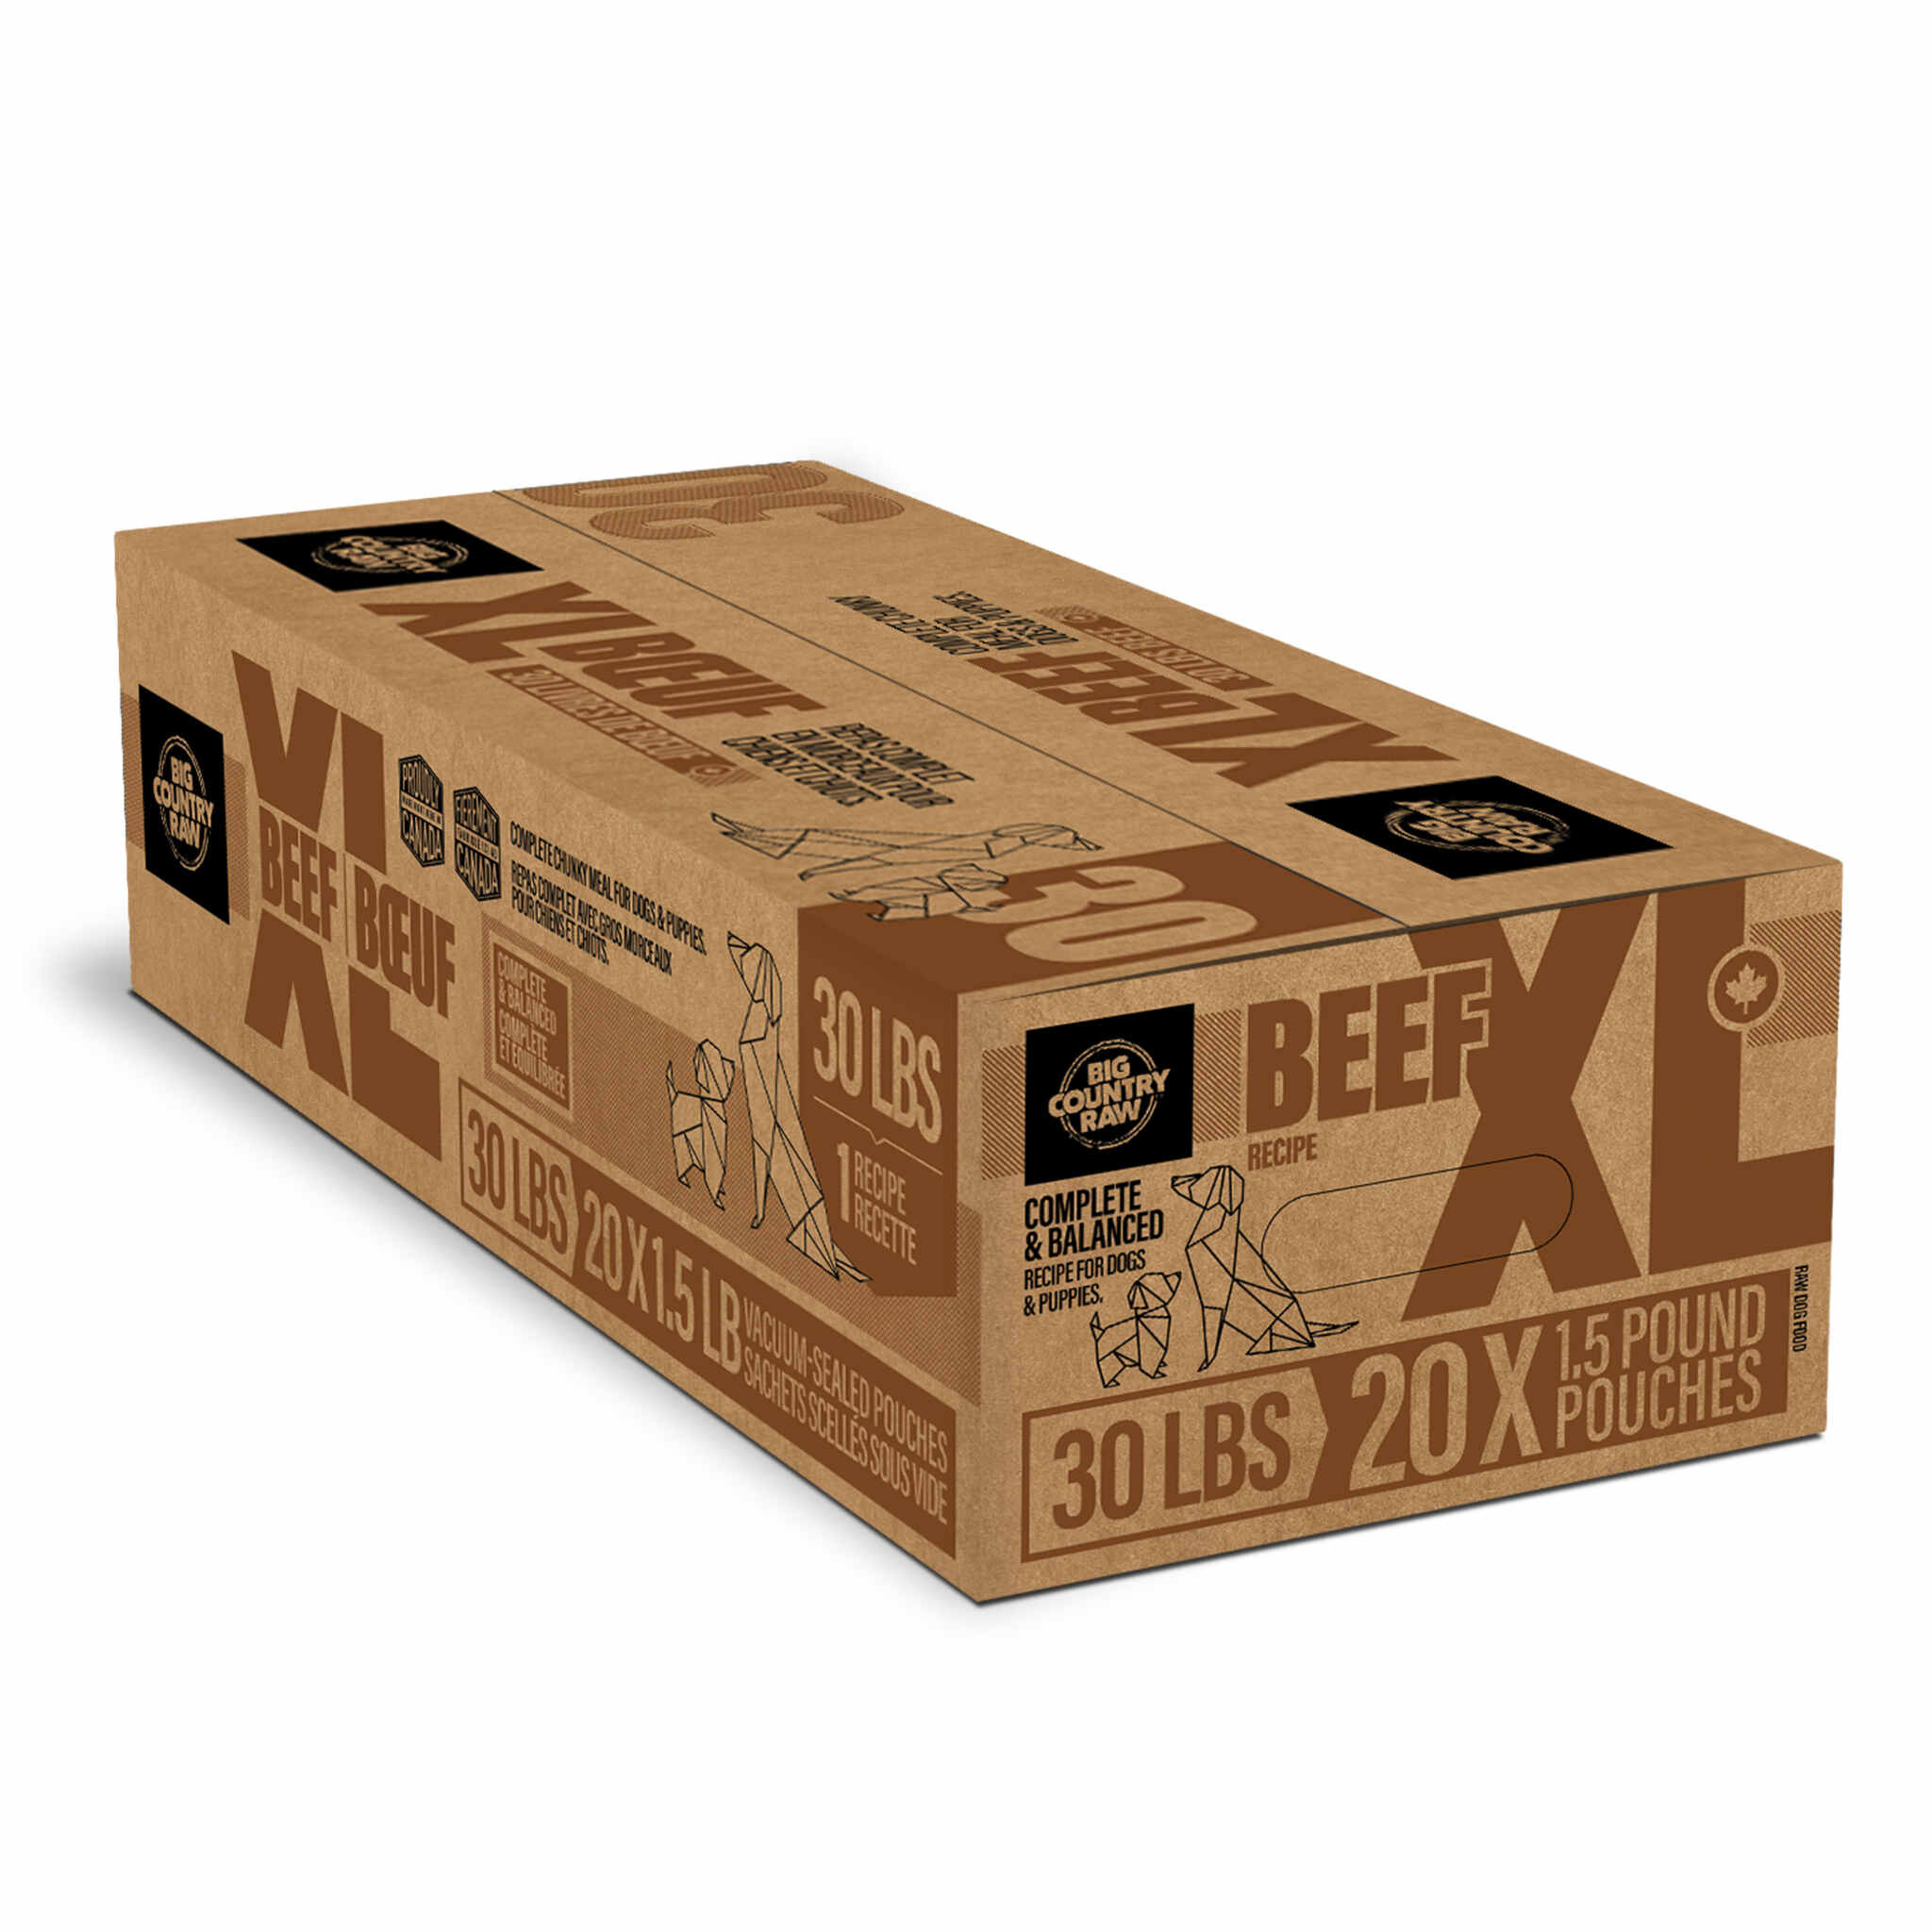 A box of Big Country Raw XL, bulk dog food, Beef recipe, 30 lb (contains twenty 1.5 lb pouches), requires freezing.